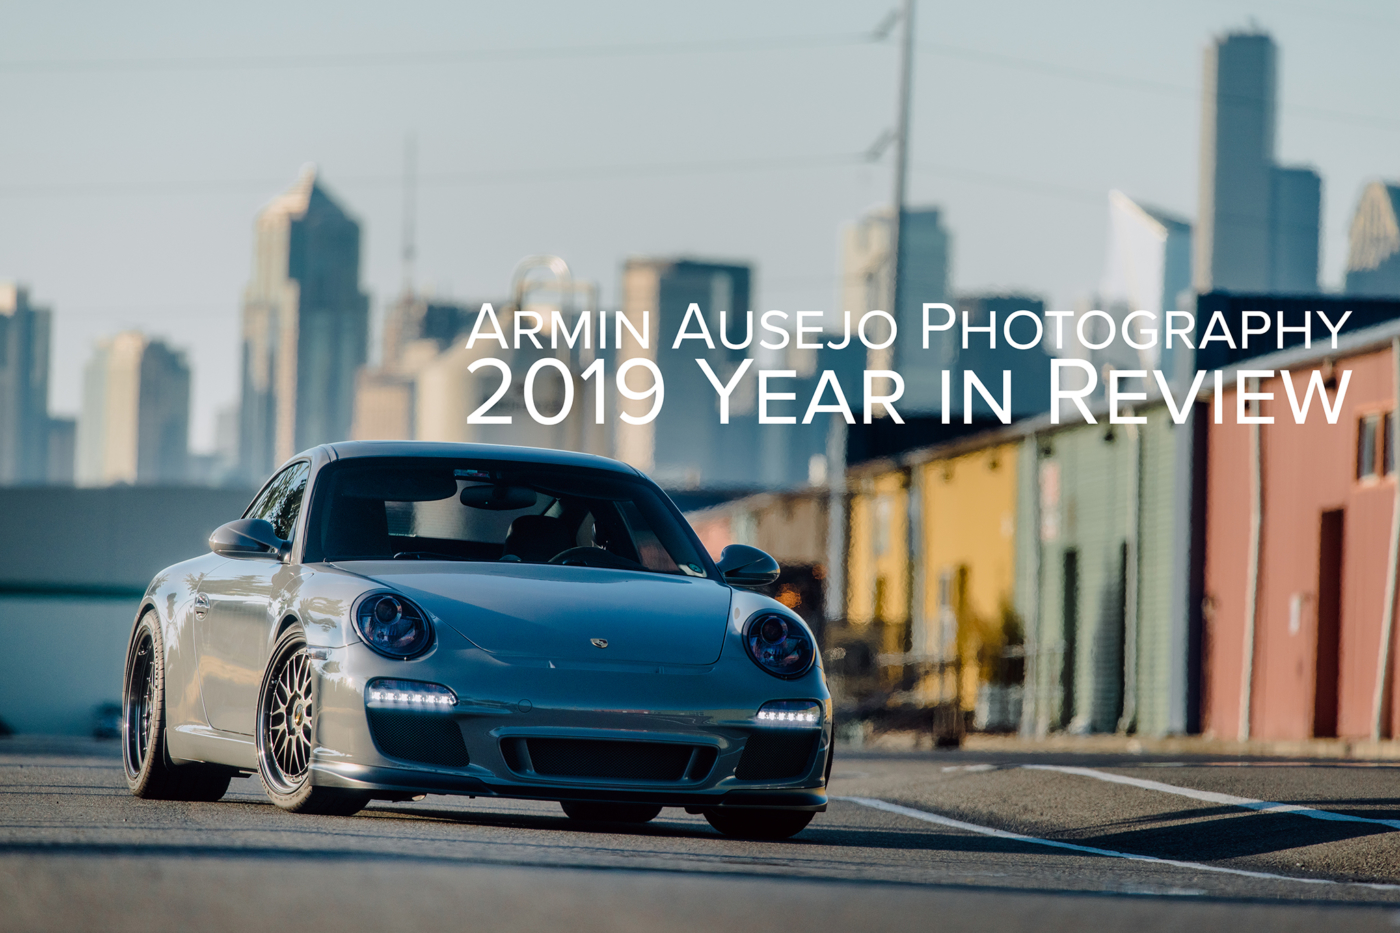 2019 Armin Ausejo Photography Year in Review